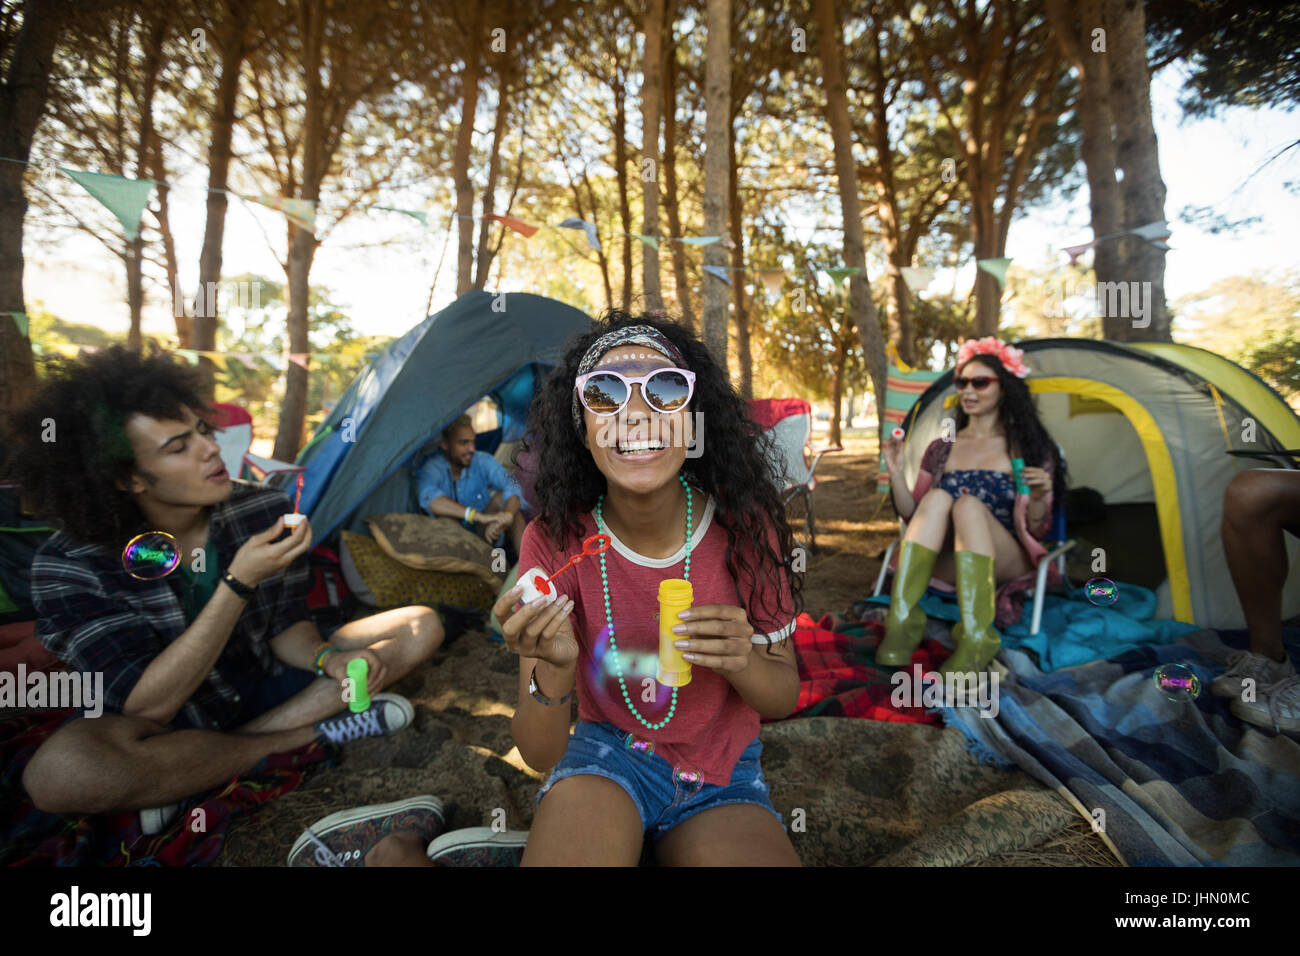 Happy young woman holding bubble wand with friends in background at campsite Stock Photo